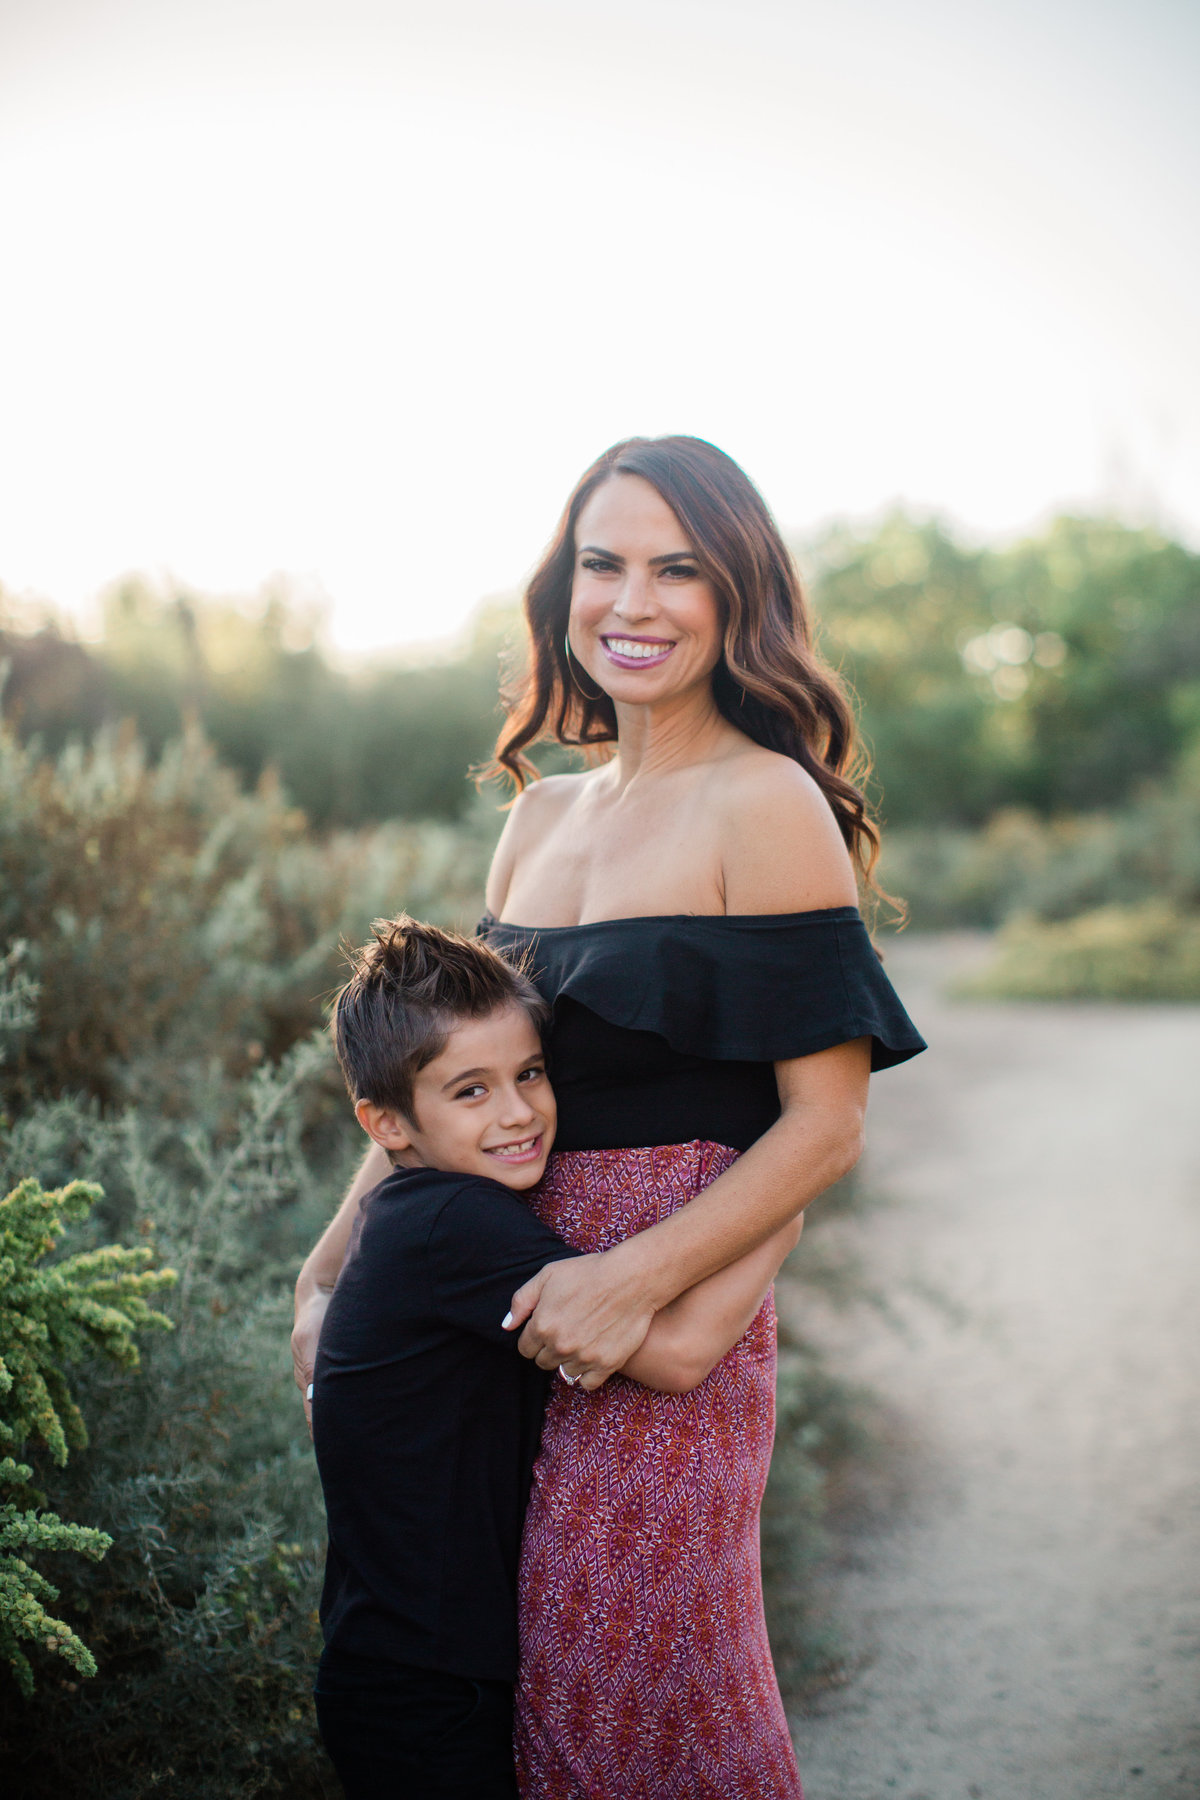 The Stillings Family 2018 | Redlands Family Photographer | Katie Schoepflin Photography64